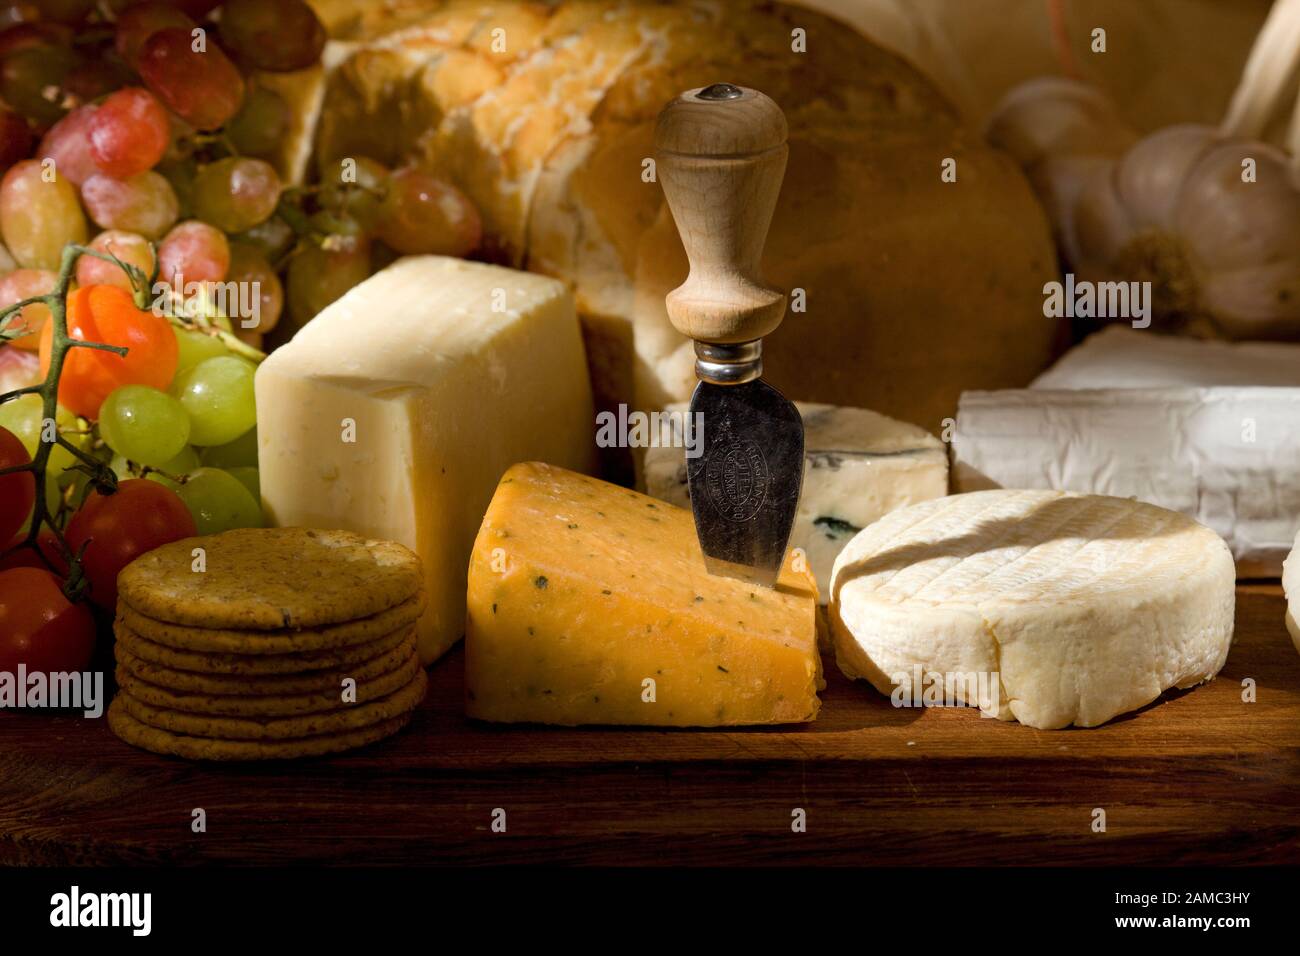 Cheese board with a selection of english and french cheeses Stock Photo